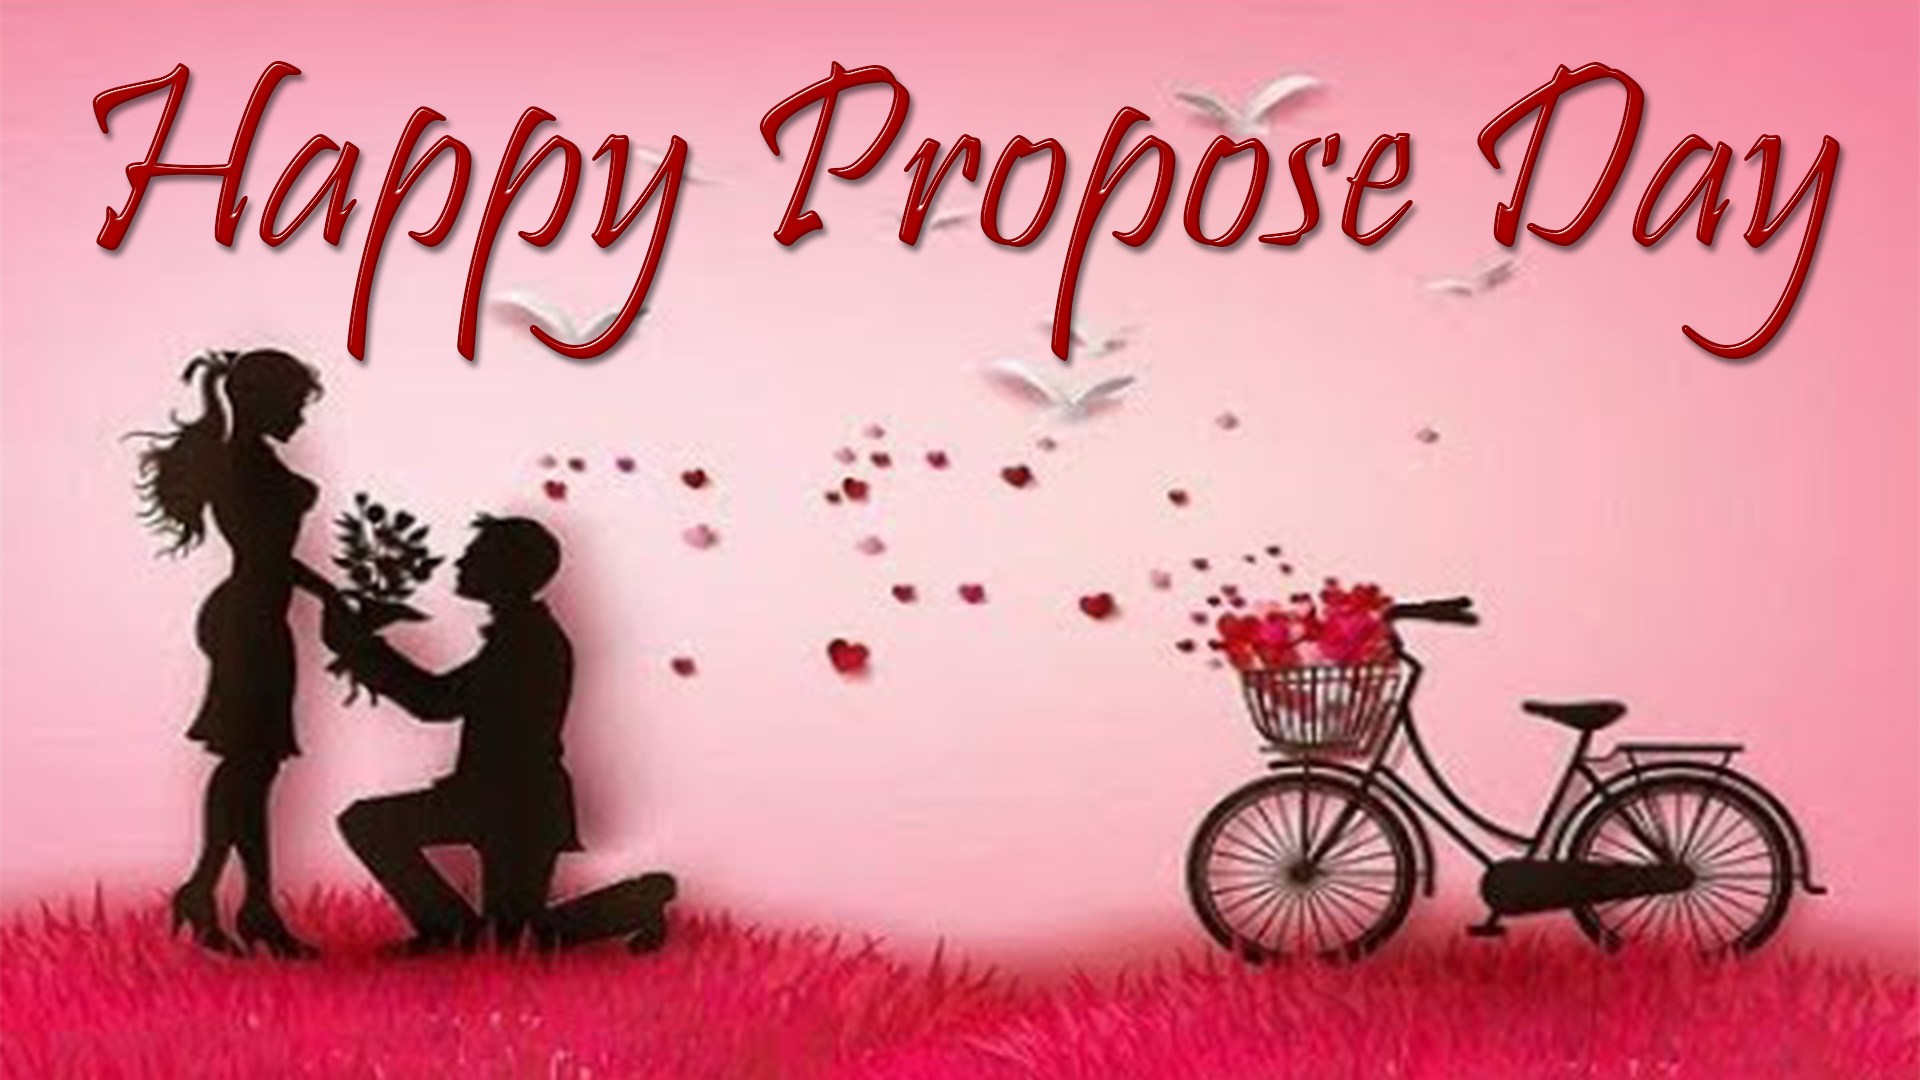 Happy Propose Day Image - Happy Retirement Wishes - HD Wallpaper 